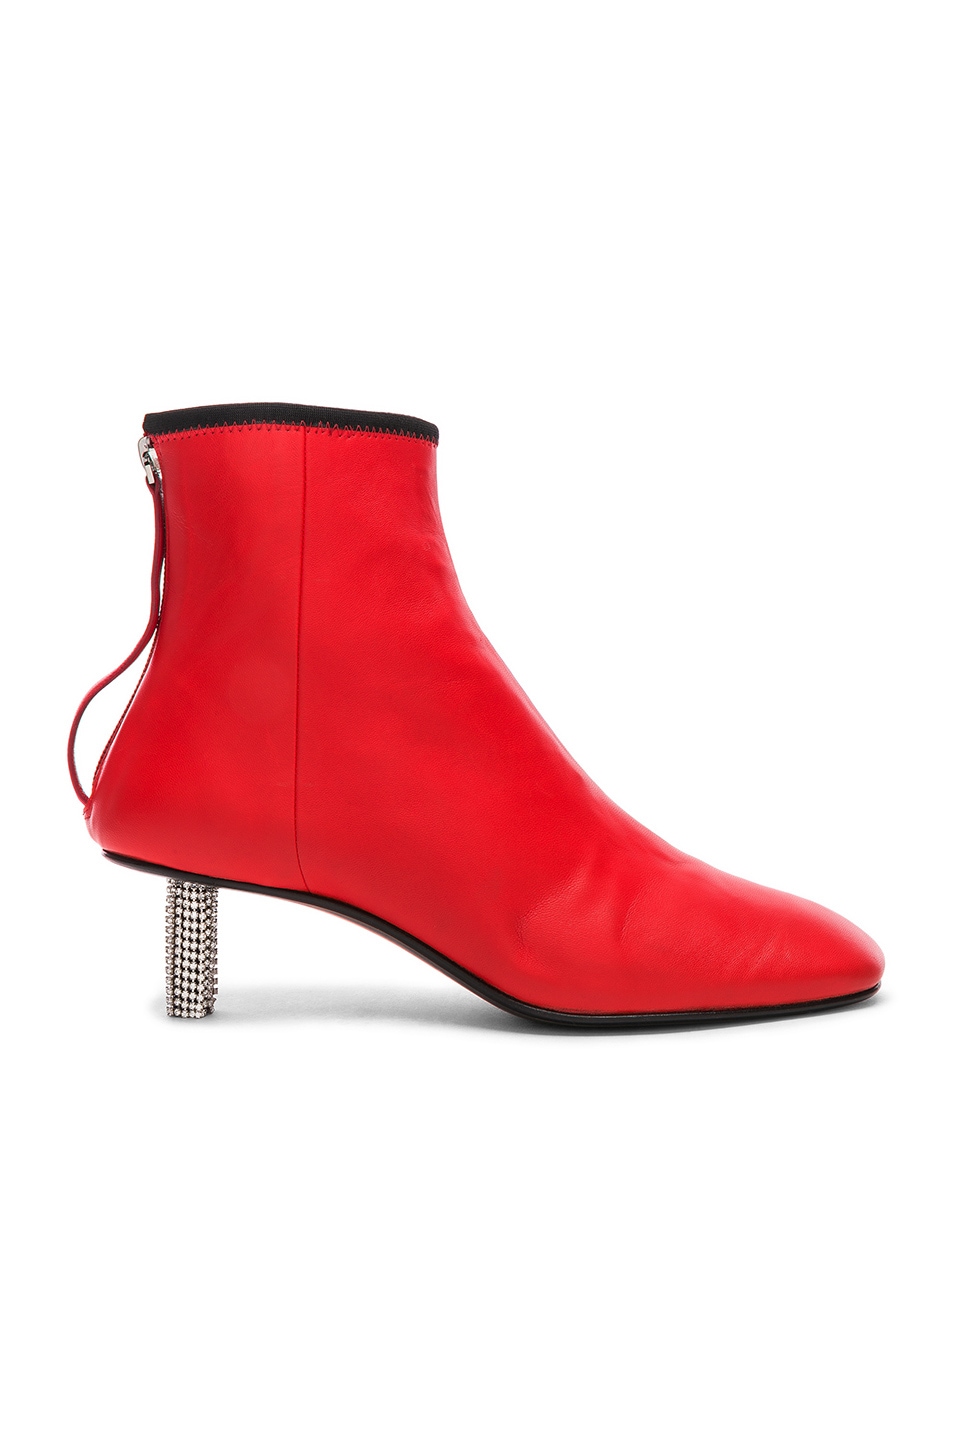 Image 1 of CALVIN KLEIN 205W39NYC Grainne Leather Crystal Heel Ankle Boots in Bright Red & Black